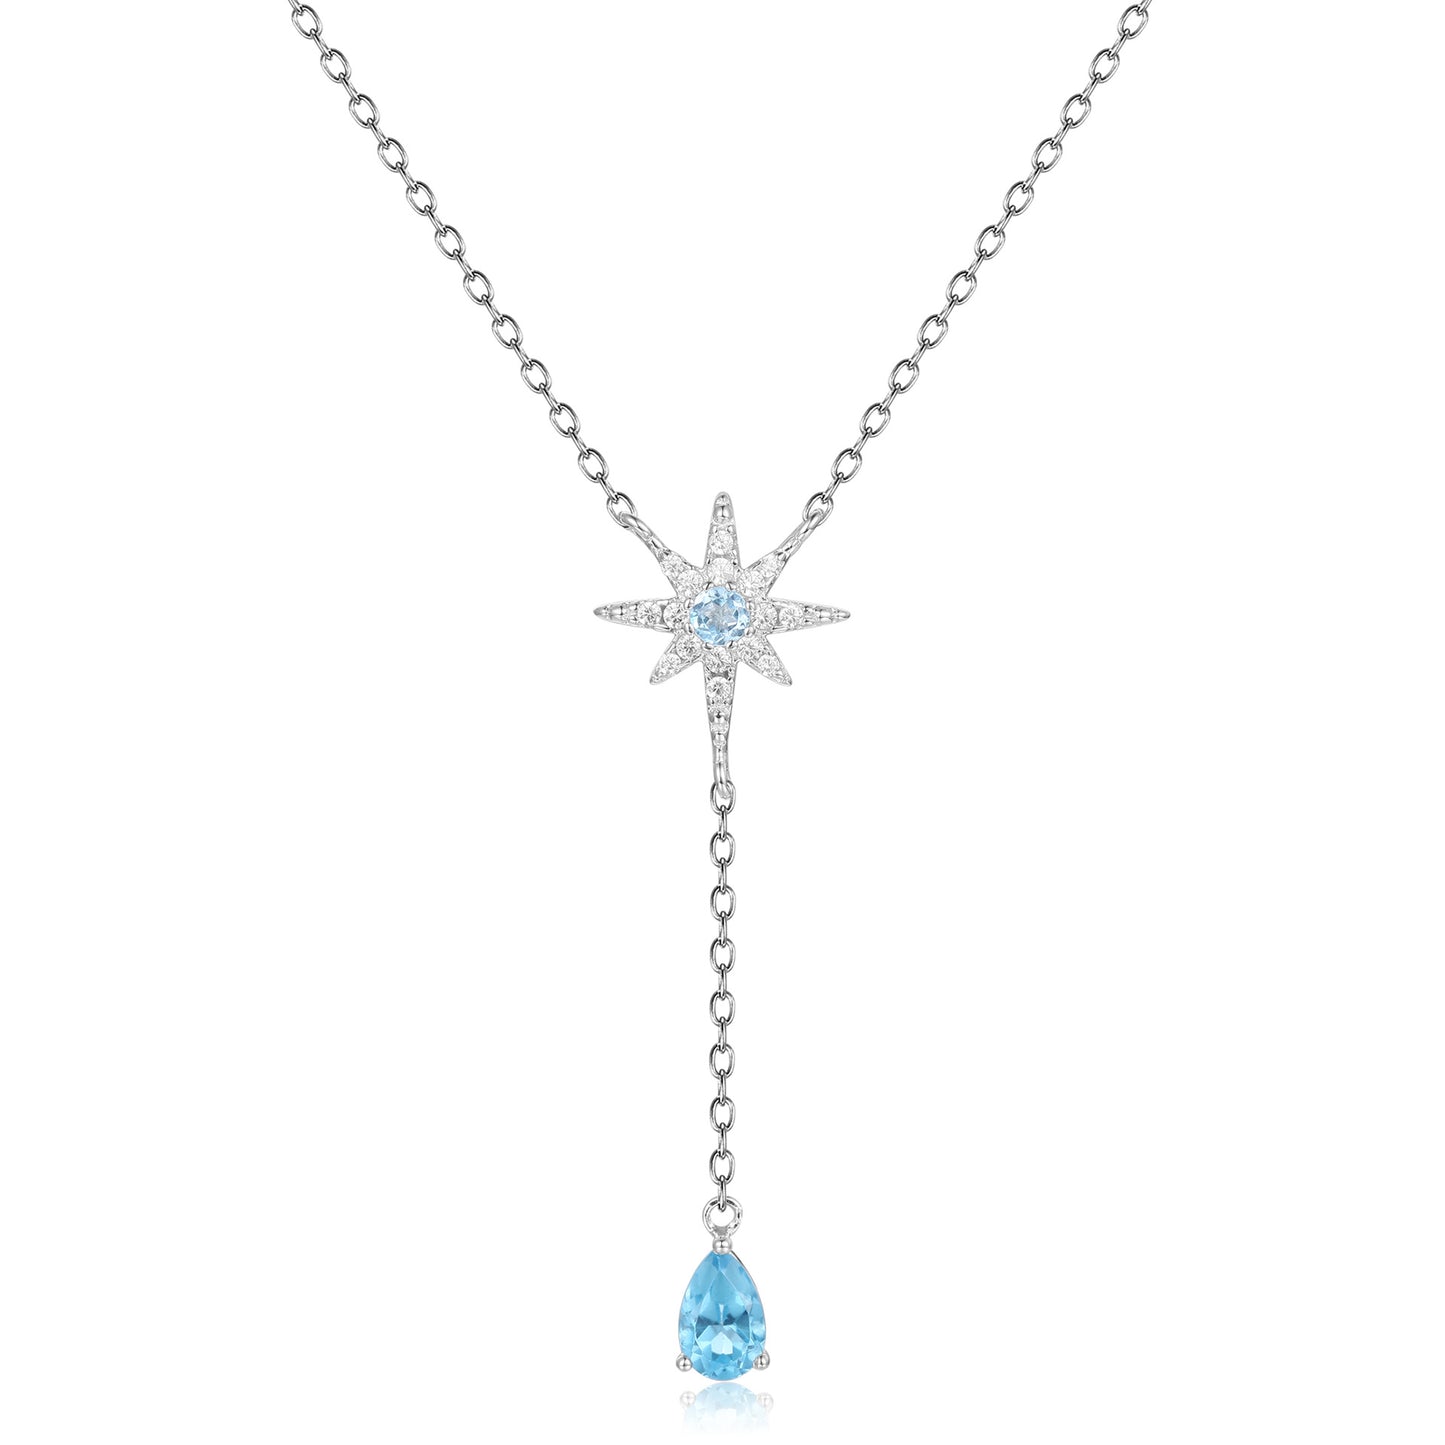 French Romantic Luxury Creative Design Inlaid Natural Topaz Star with Pear Drop Pendant Necklace for Women